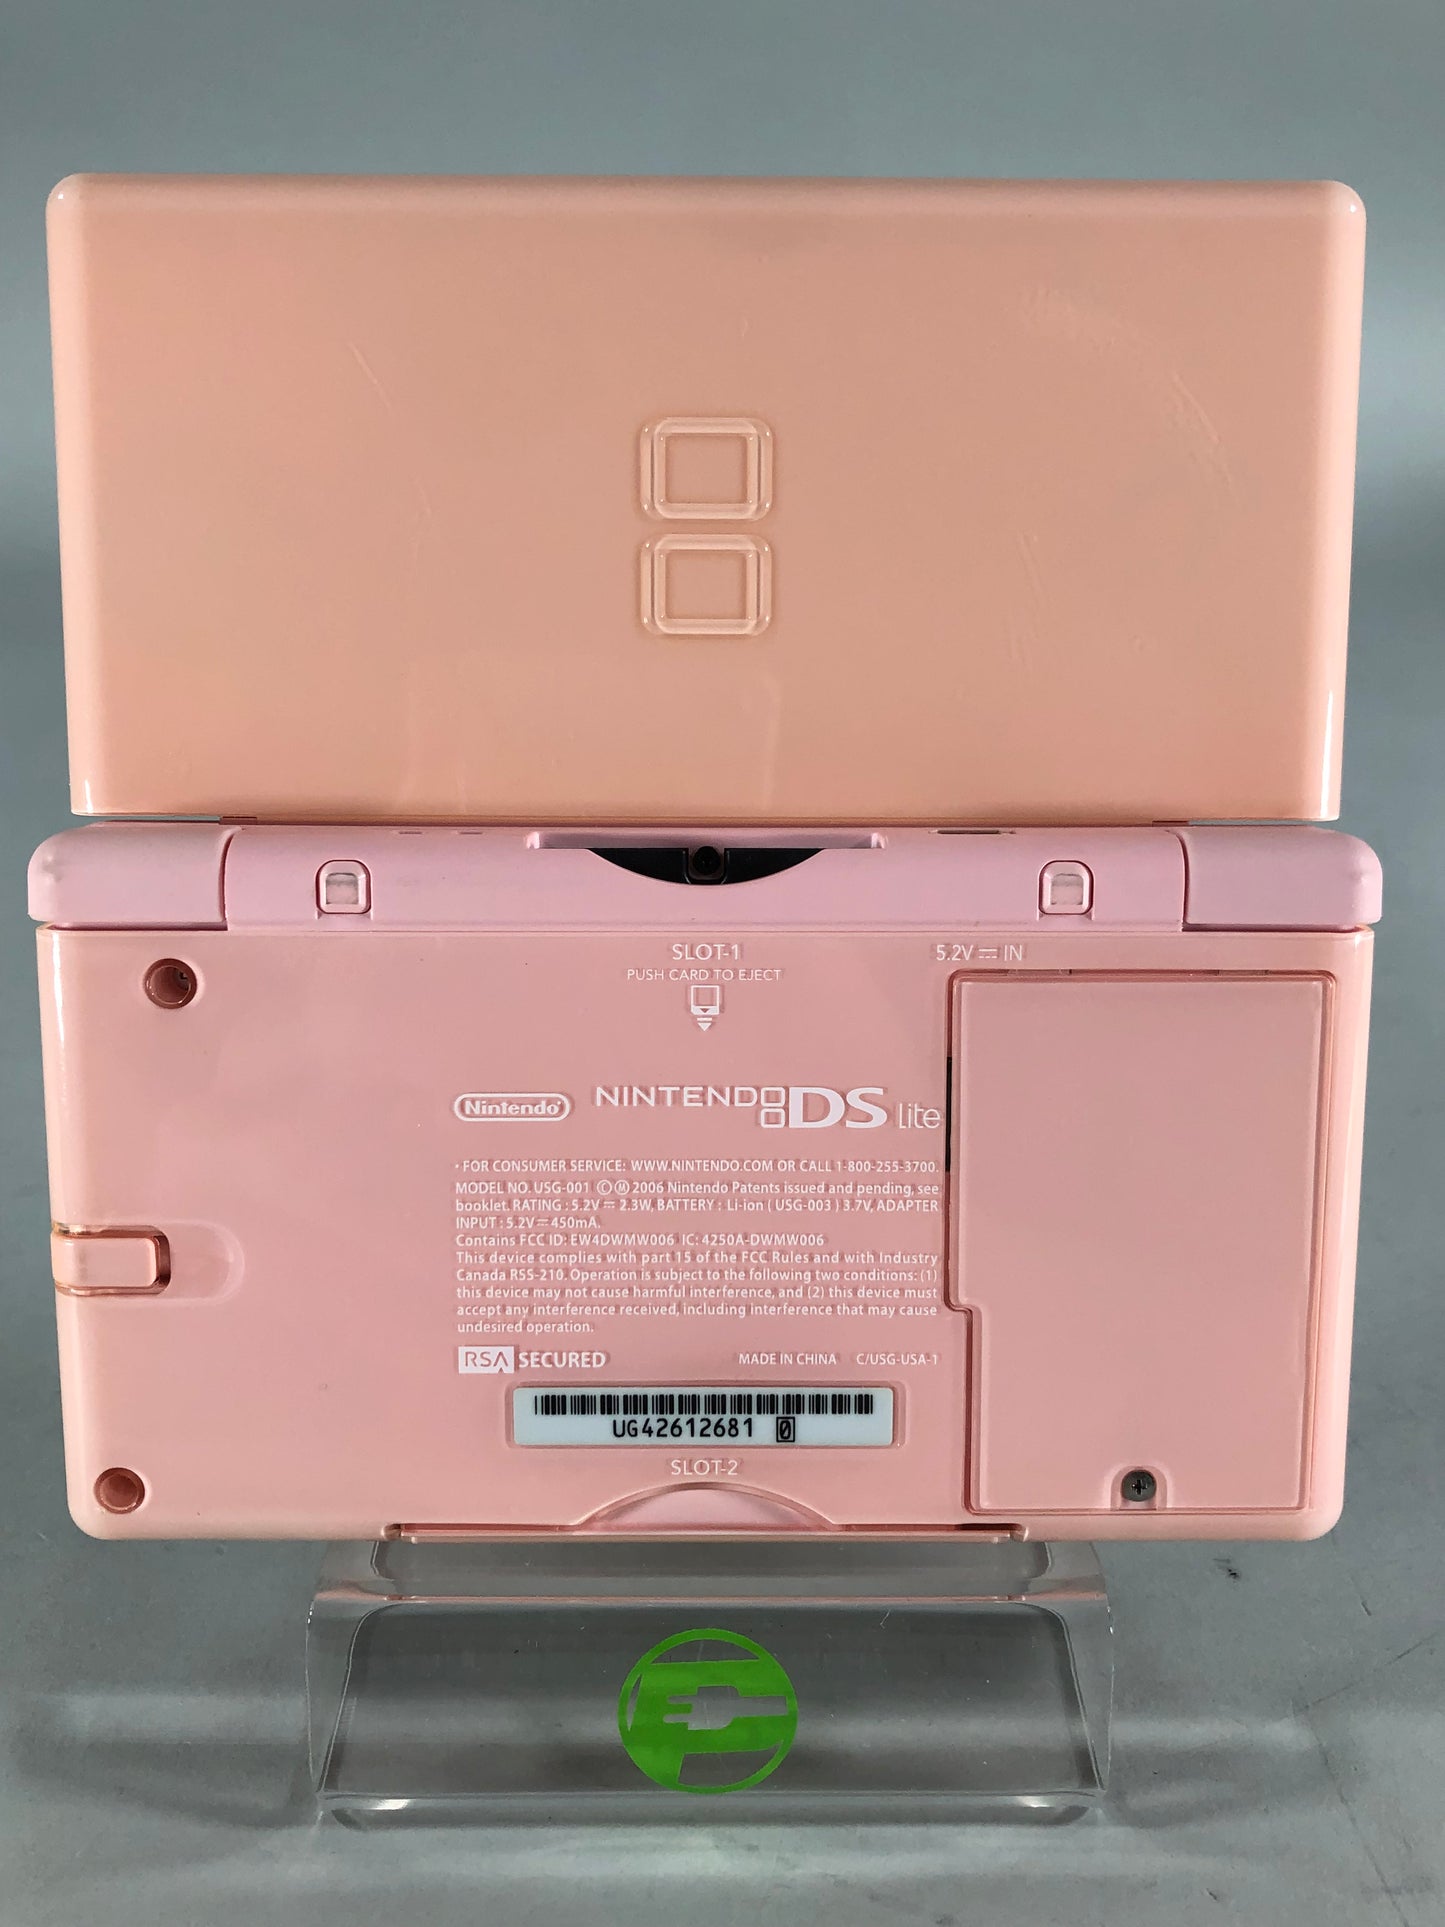 Nintendo DS Lite Handheld Game Console USG-001 Coral Pink Complete In Box CIB